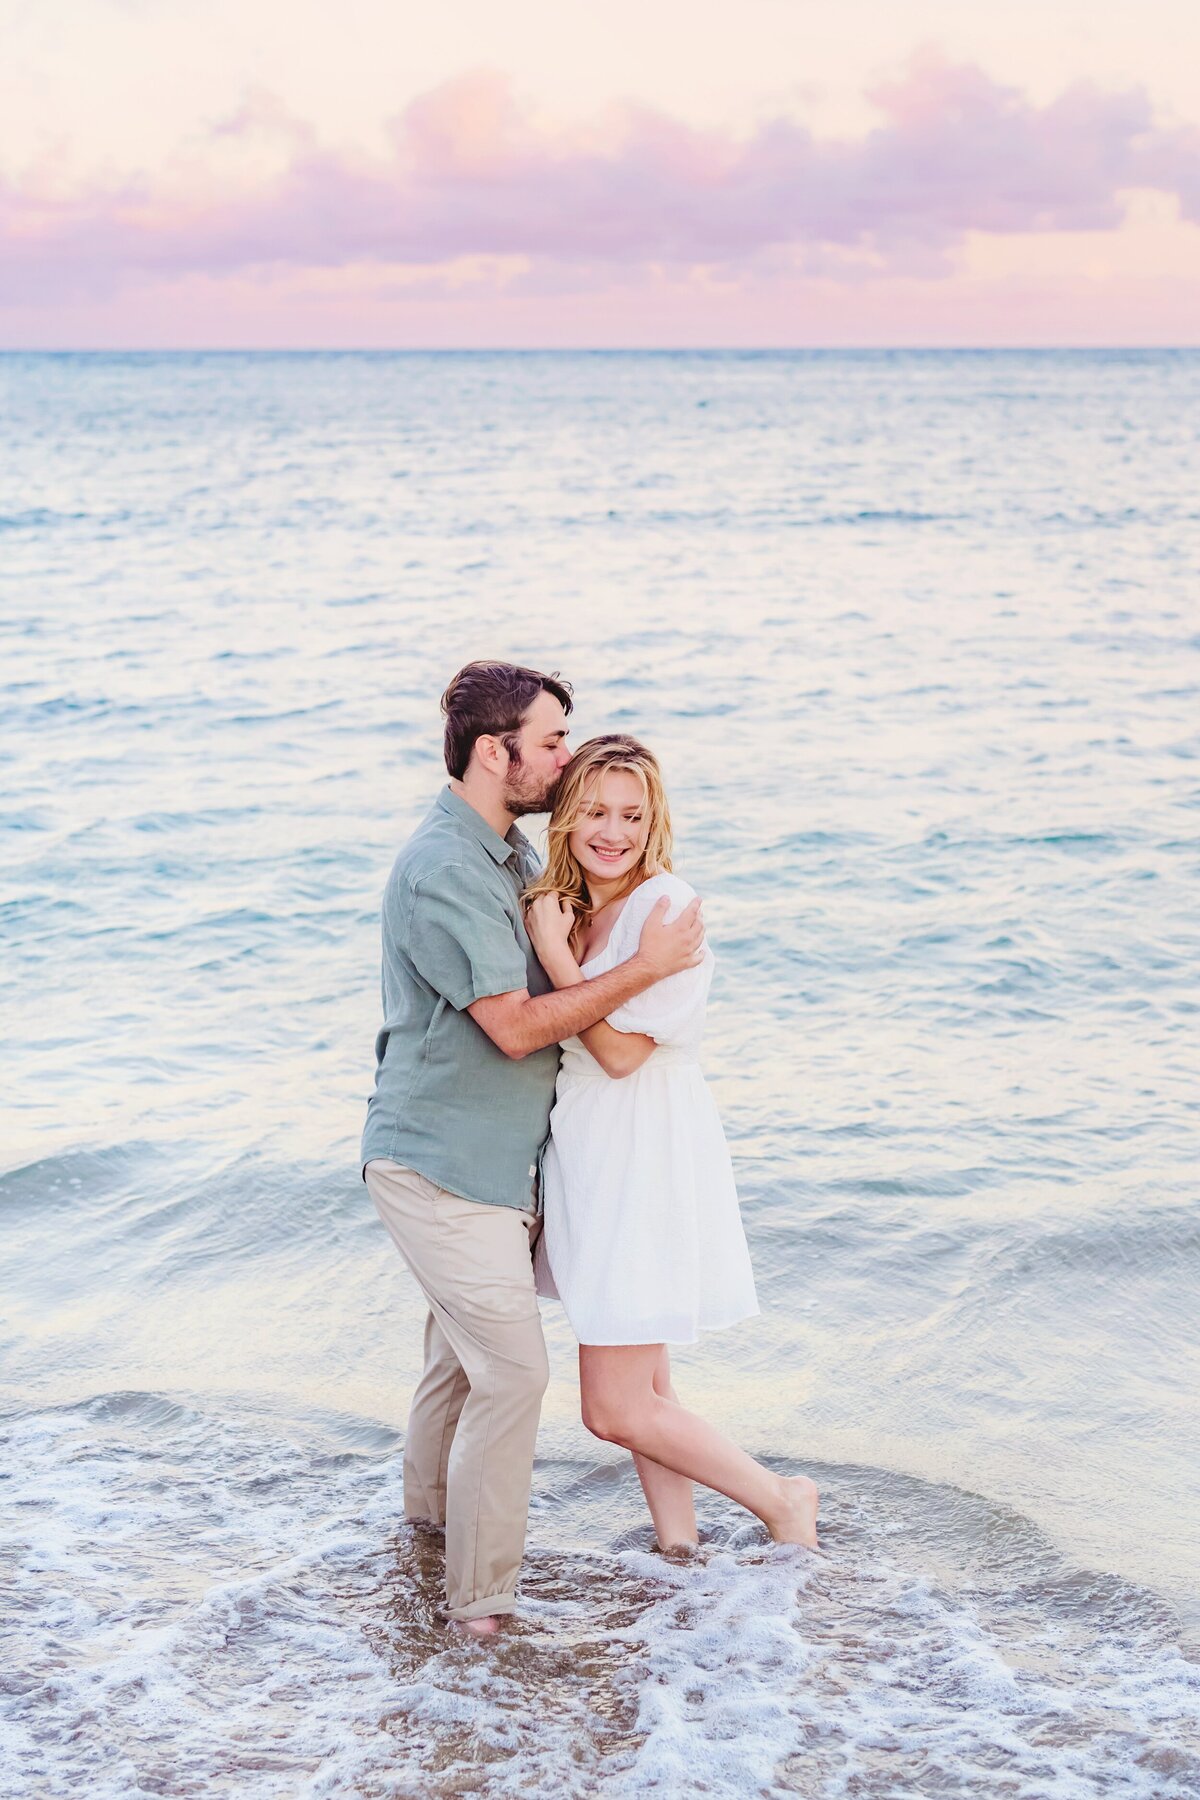 Blonde woman in a white dress is kissed by her boyfriend on the head as they stand ankle deep in the water during their Oahu couples photoshoot